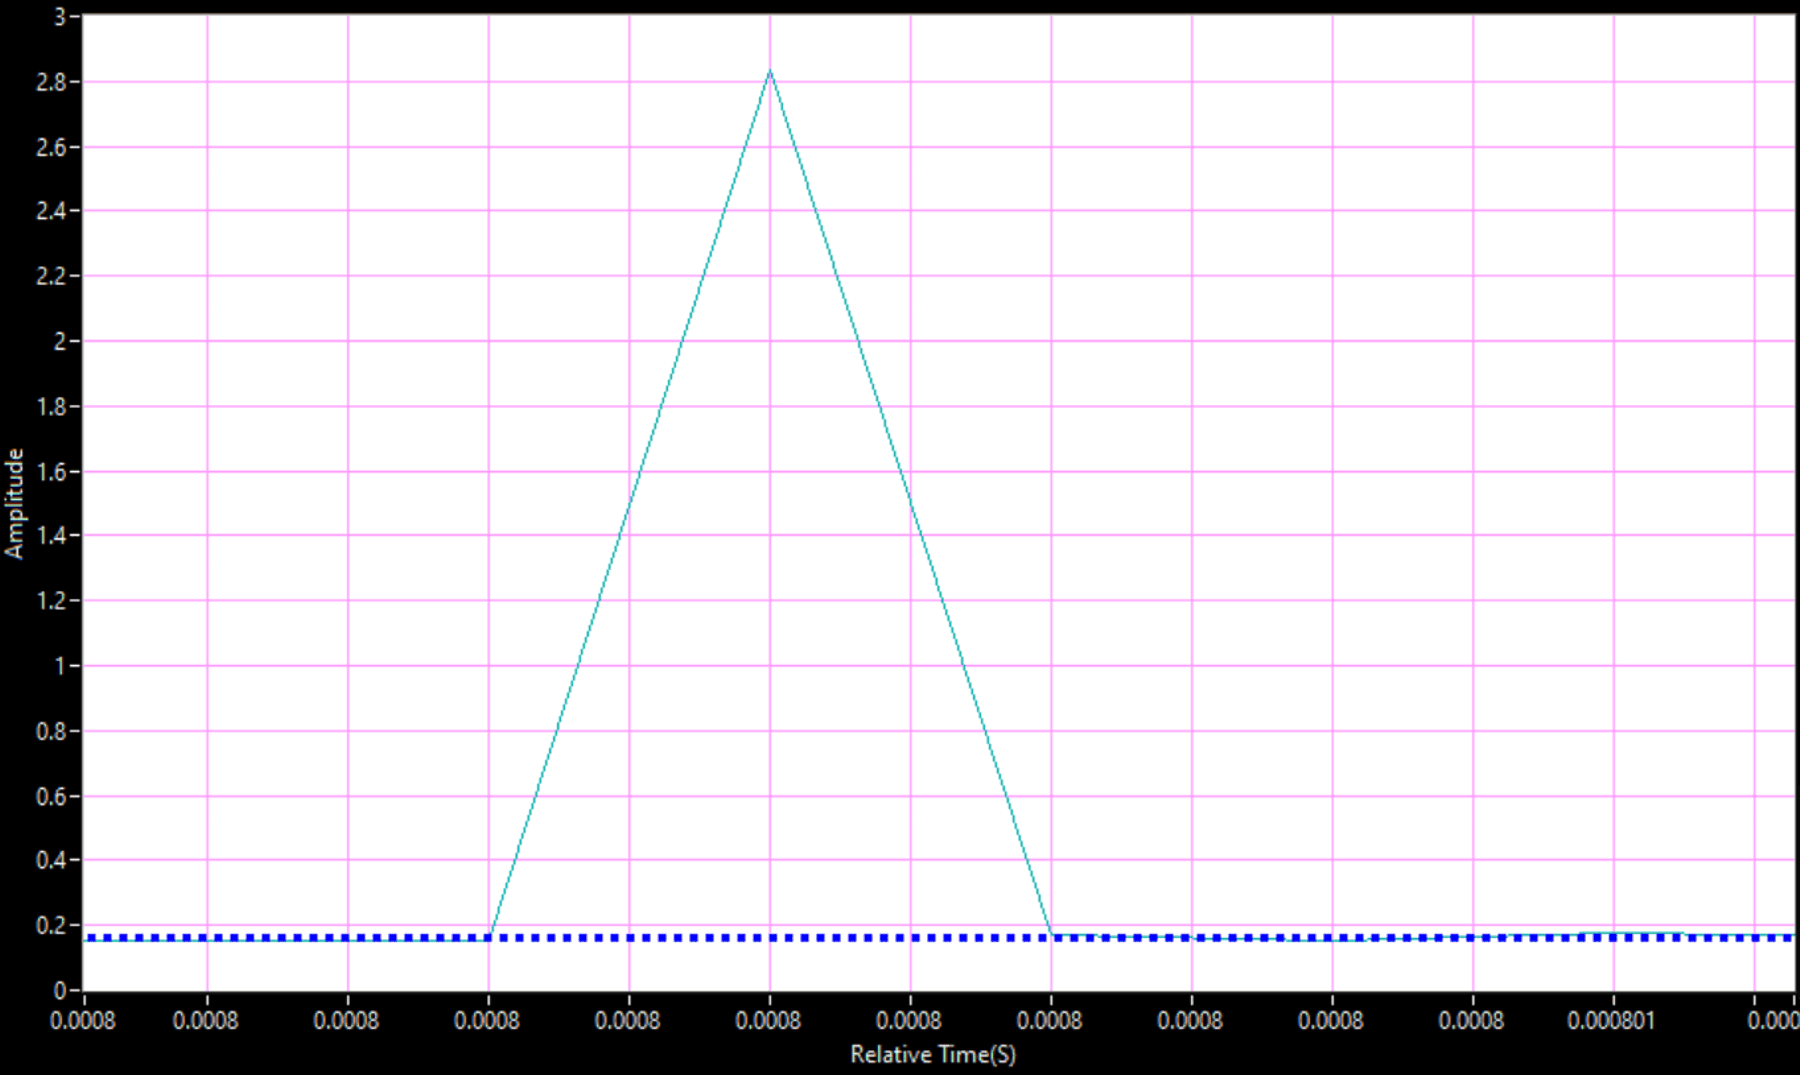 ADC3683-SP Example of a Short Event from
                    Run 12